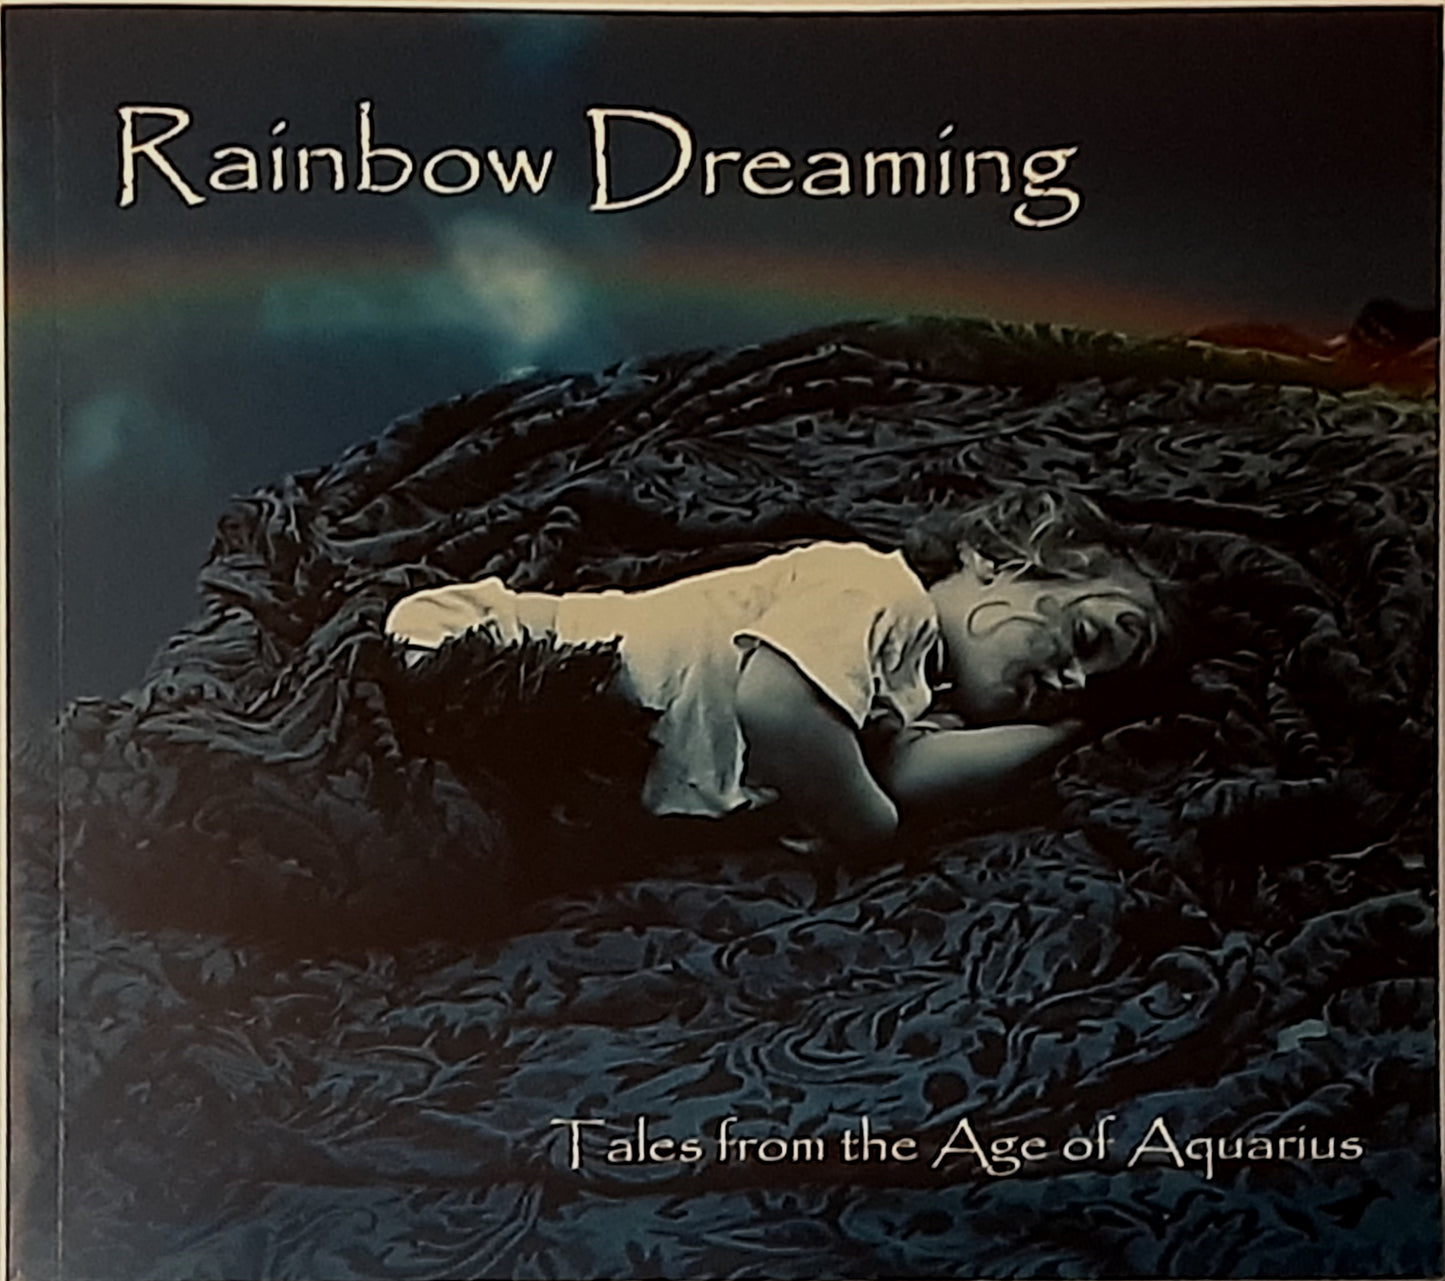 Rainbow Dreaming: Tales from the Age of Aquarius